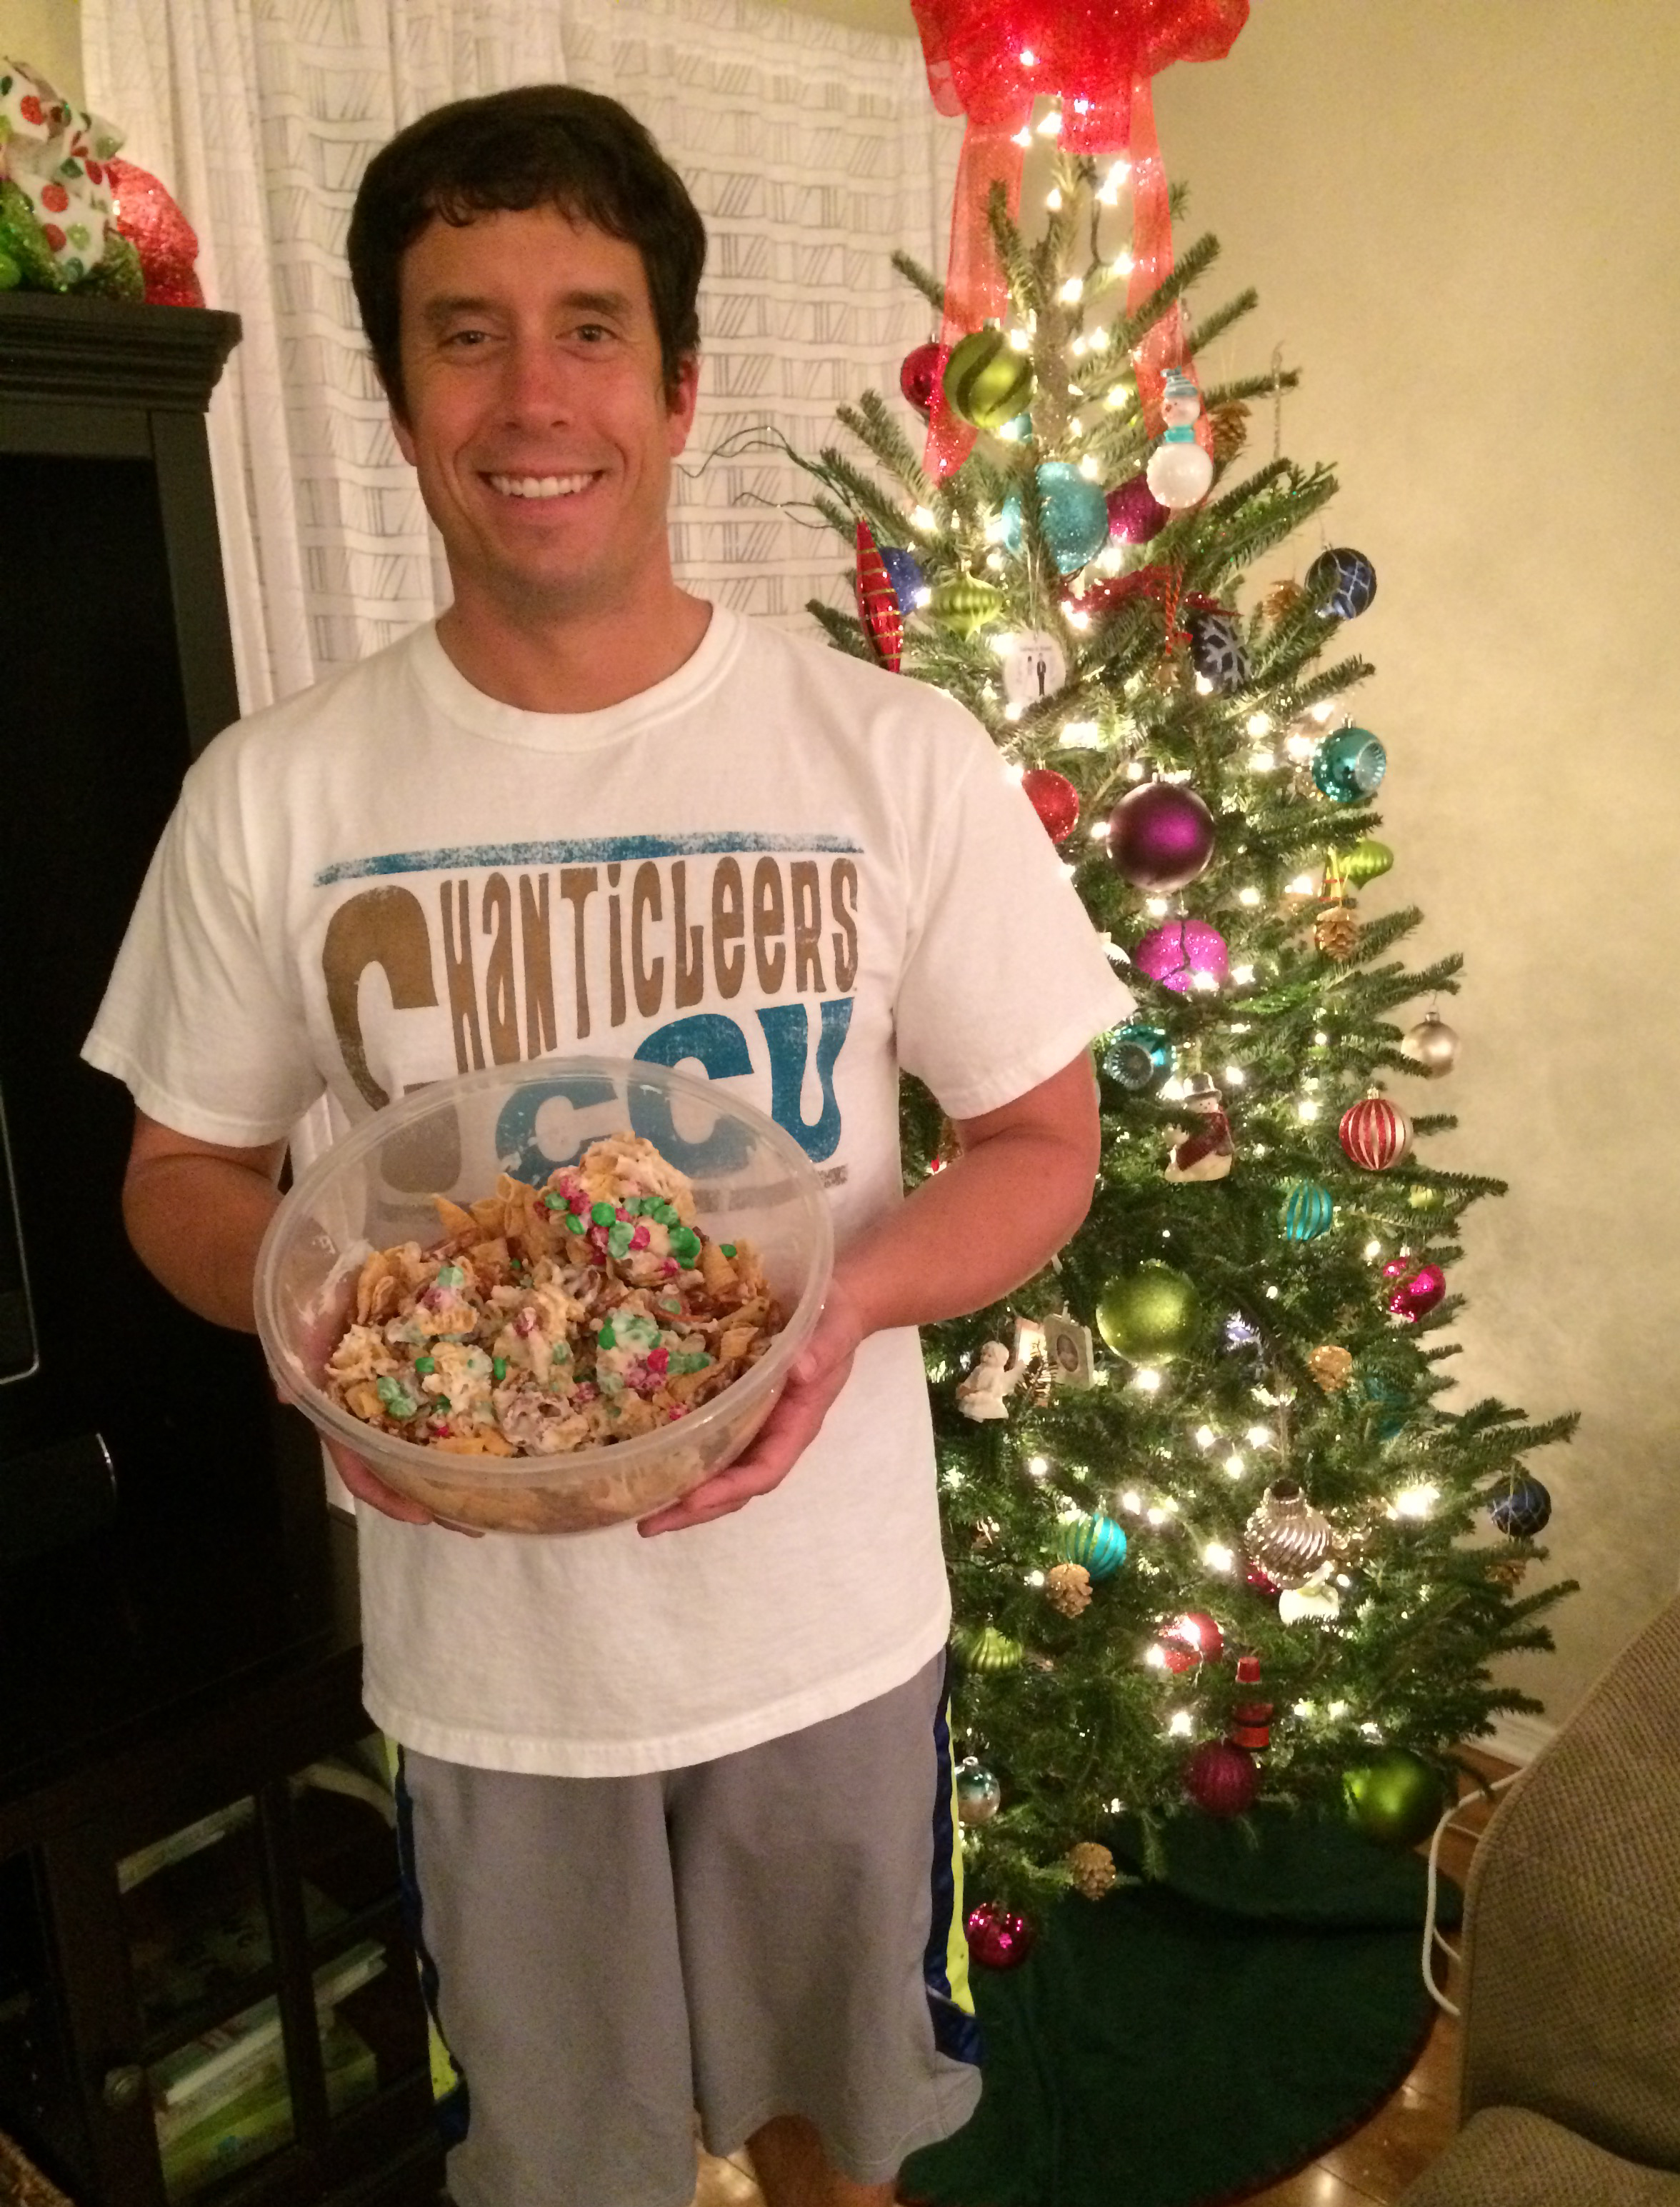 This is me proudly holding one of the batches of Christmas Reindeer Crack I made.